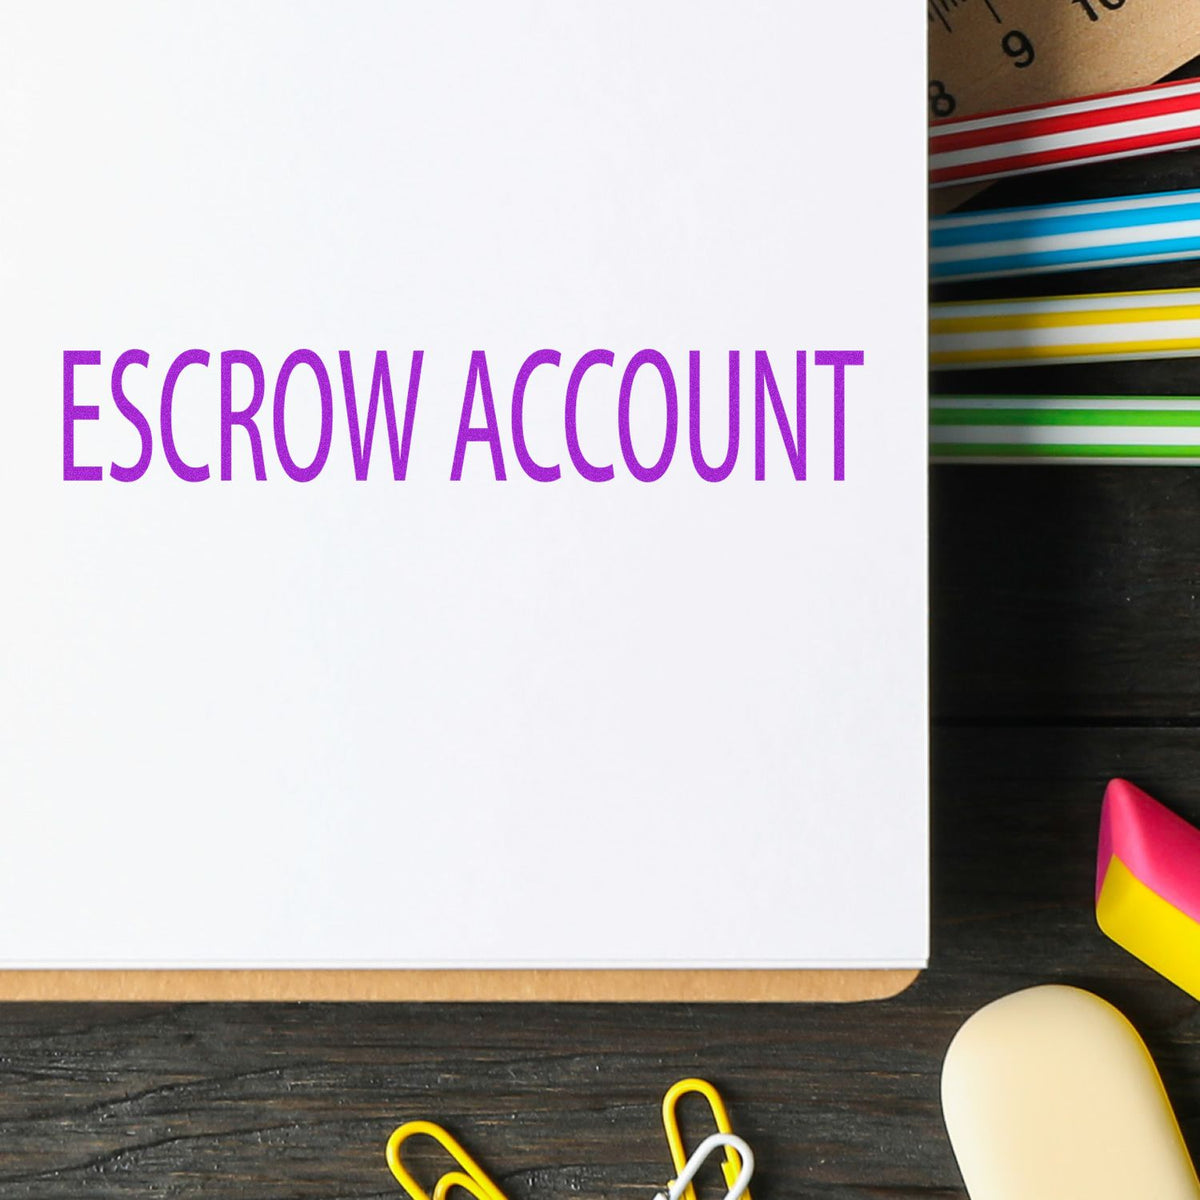 Large Escrow Account Rubber Stamp In Use